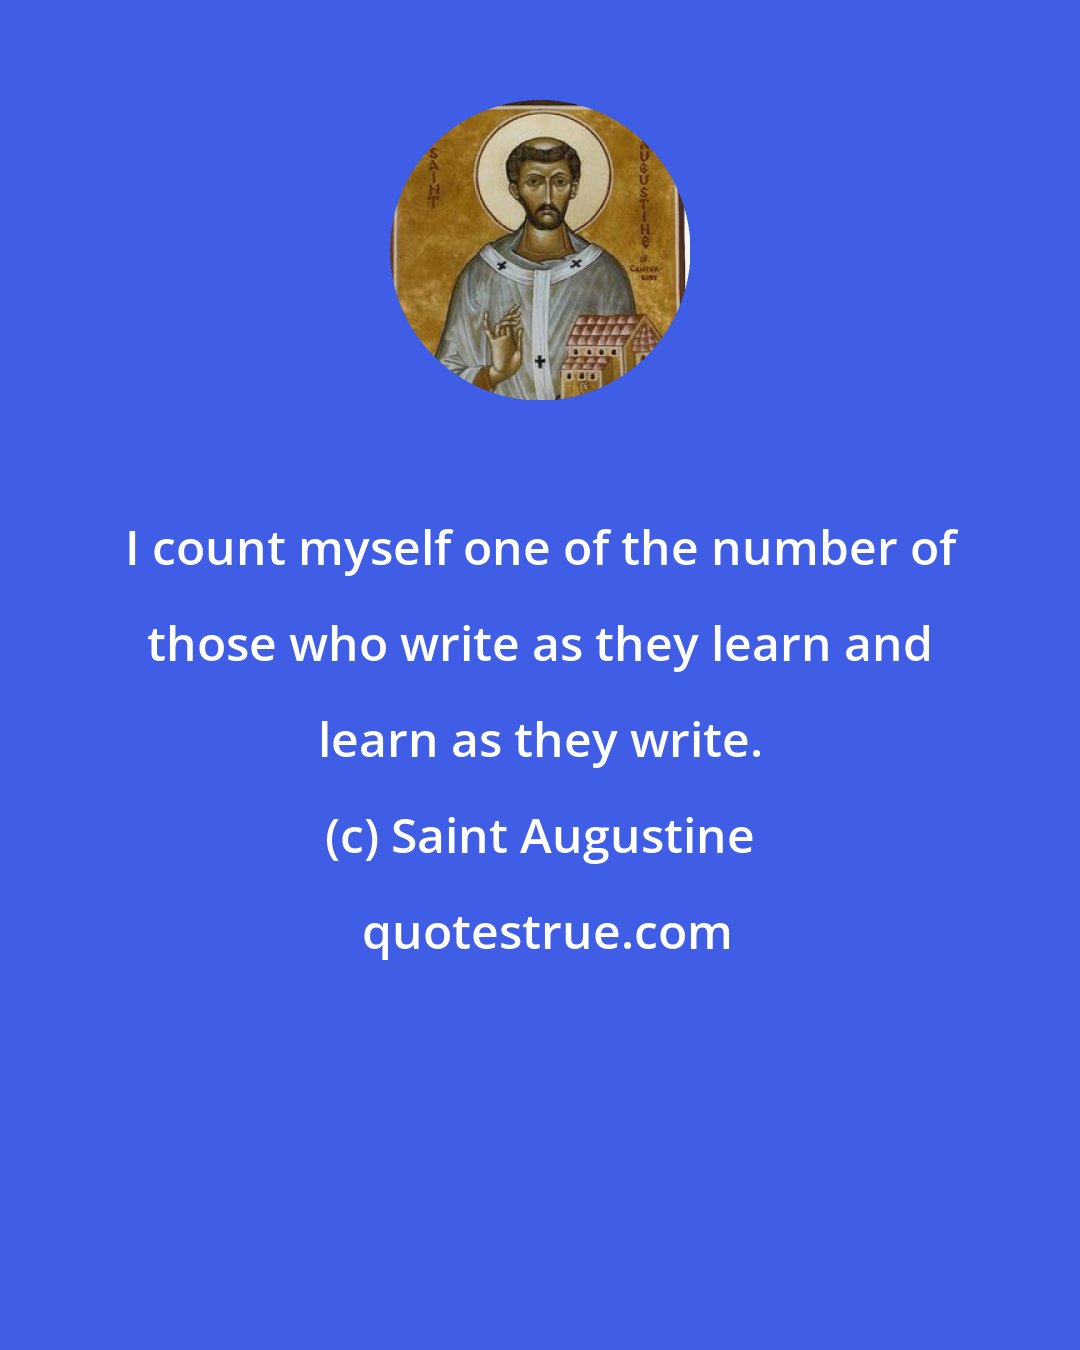 Saint Augustine: I count myself one of the number of those who write as they learn and learn as they write.